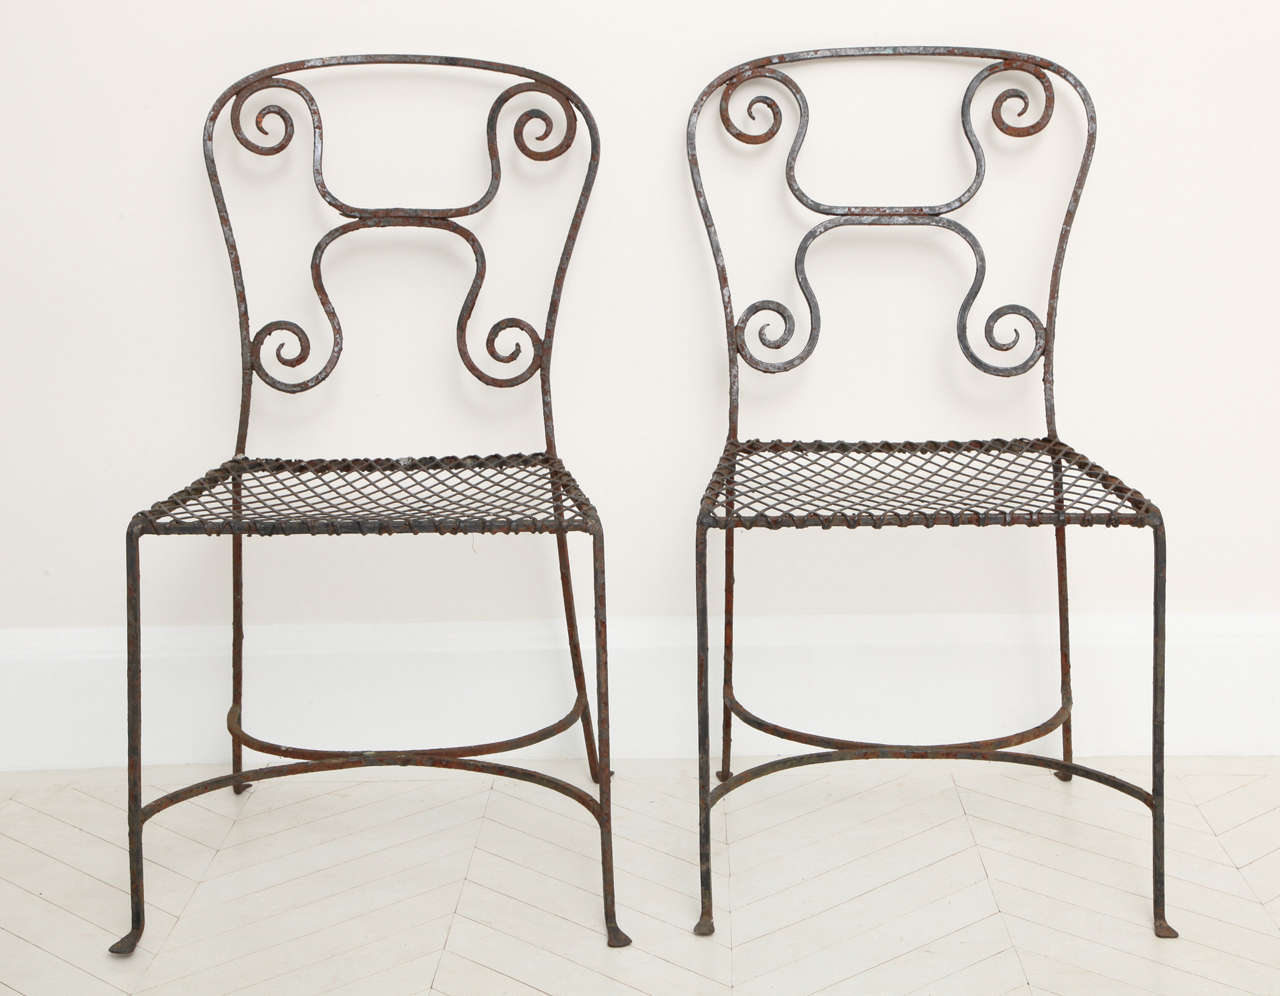 A pair of early 19th century French painted wrought-iron side chairs
with open back and lattice seat